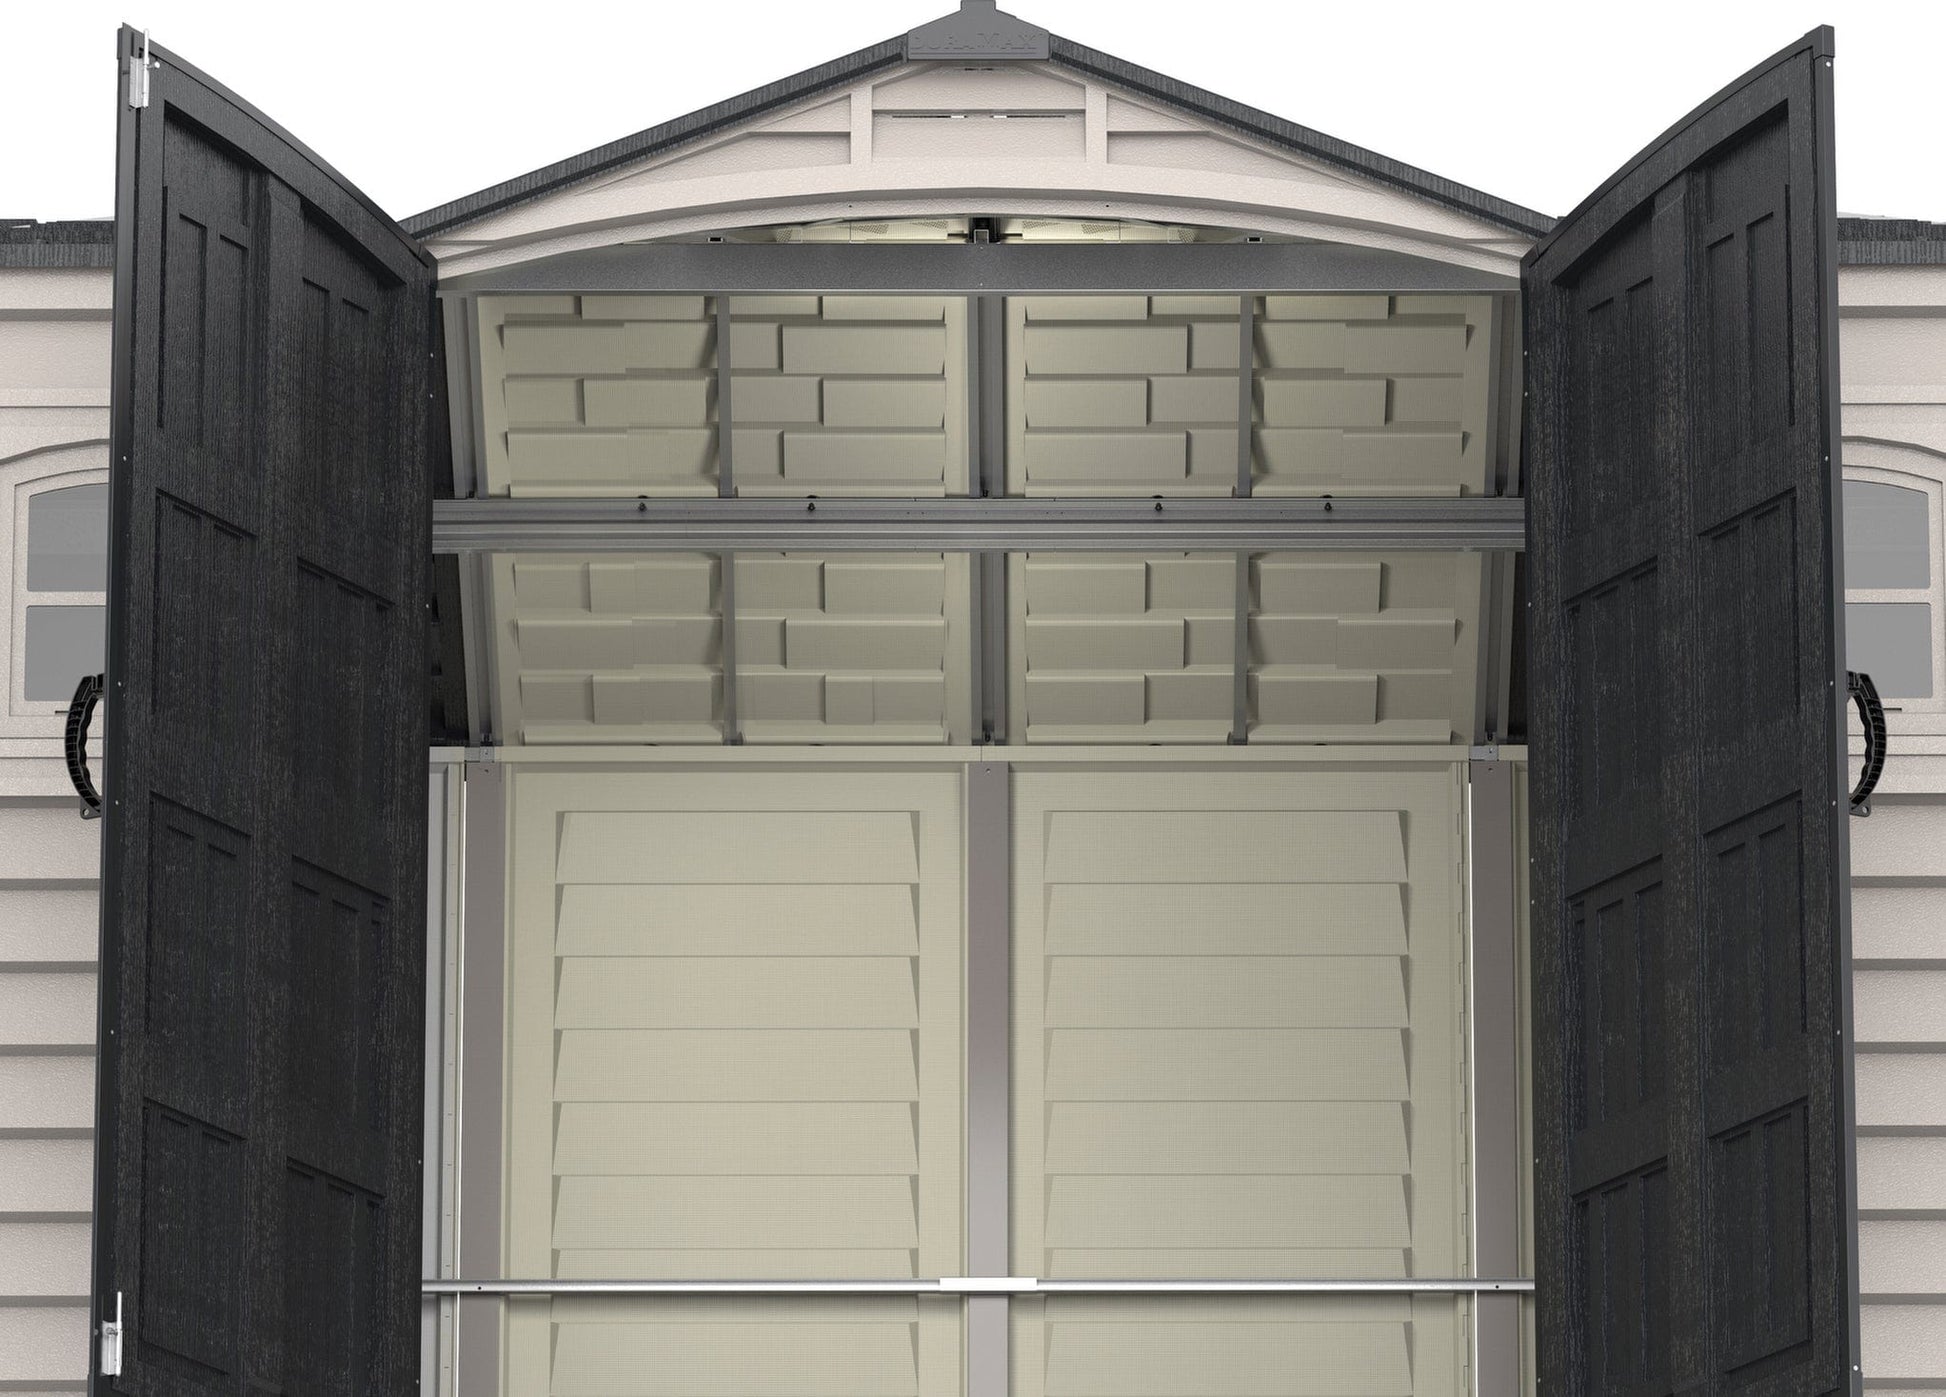 DuraMax Vinyl Shed 10.5 x 8 Apex Pro with Foundation Kit